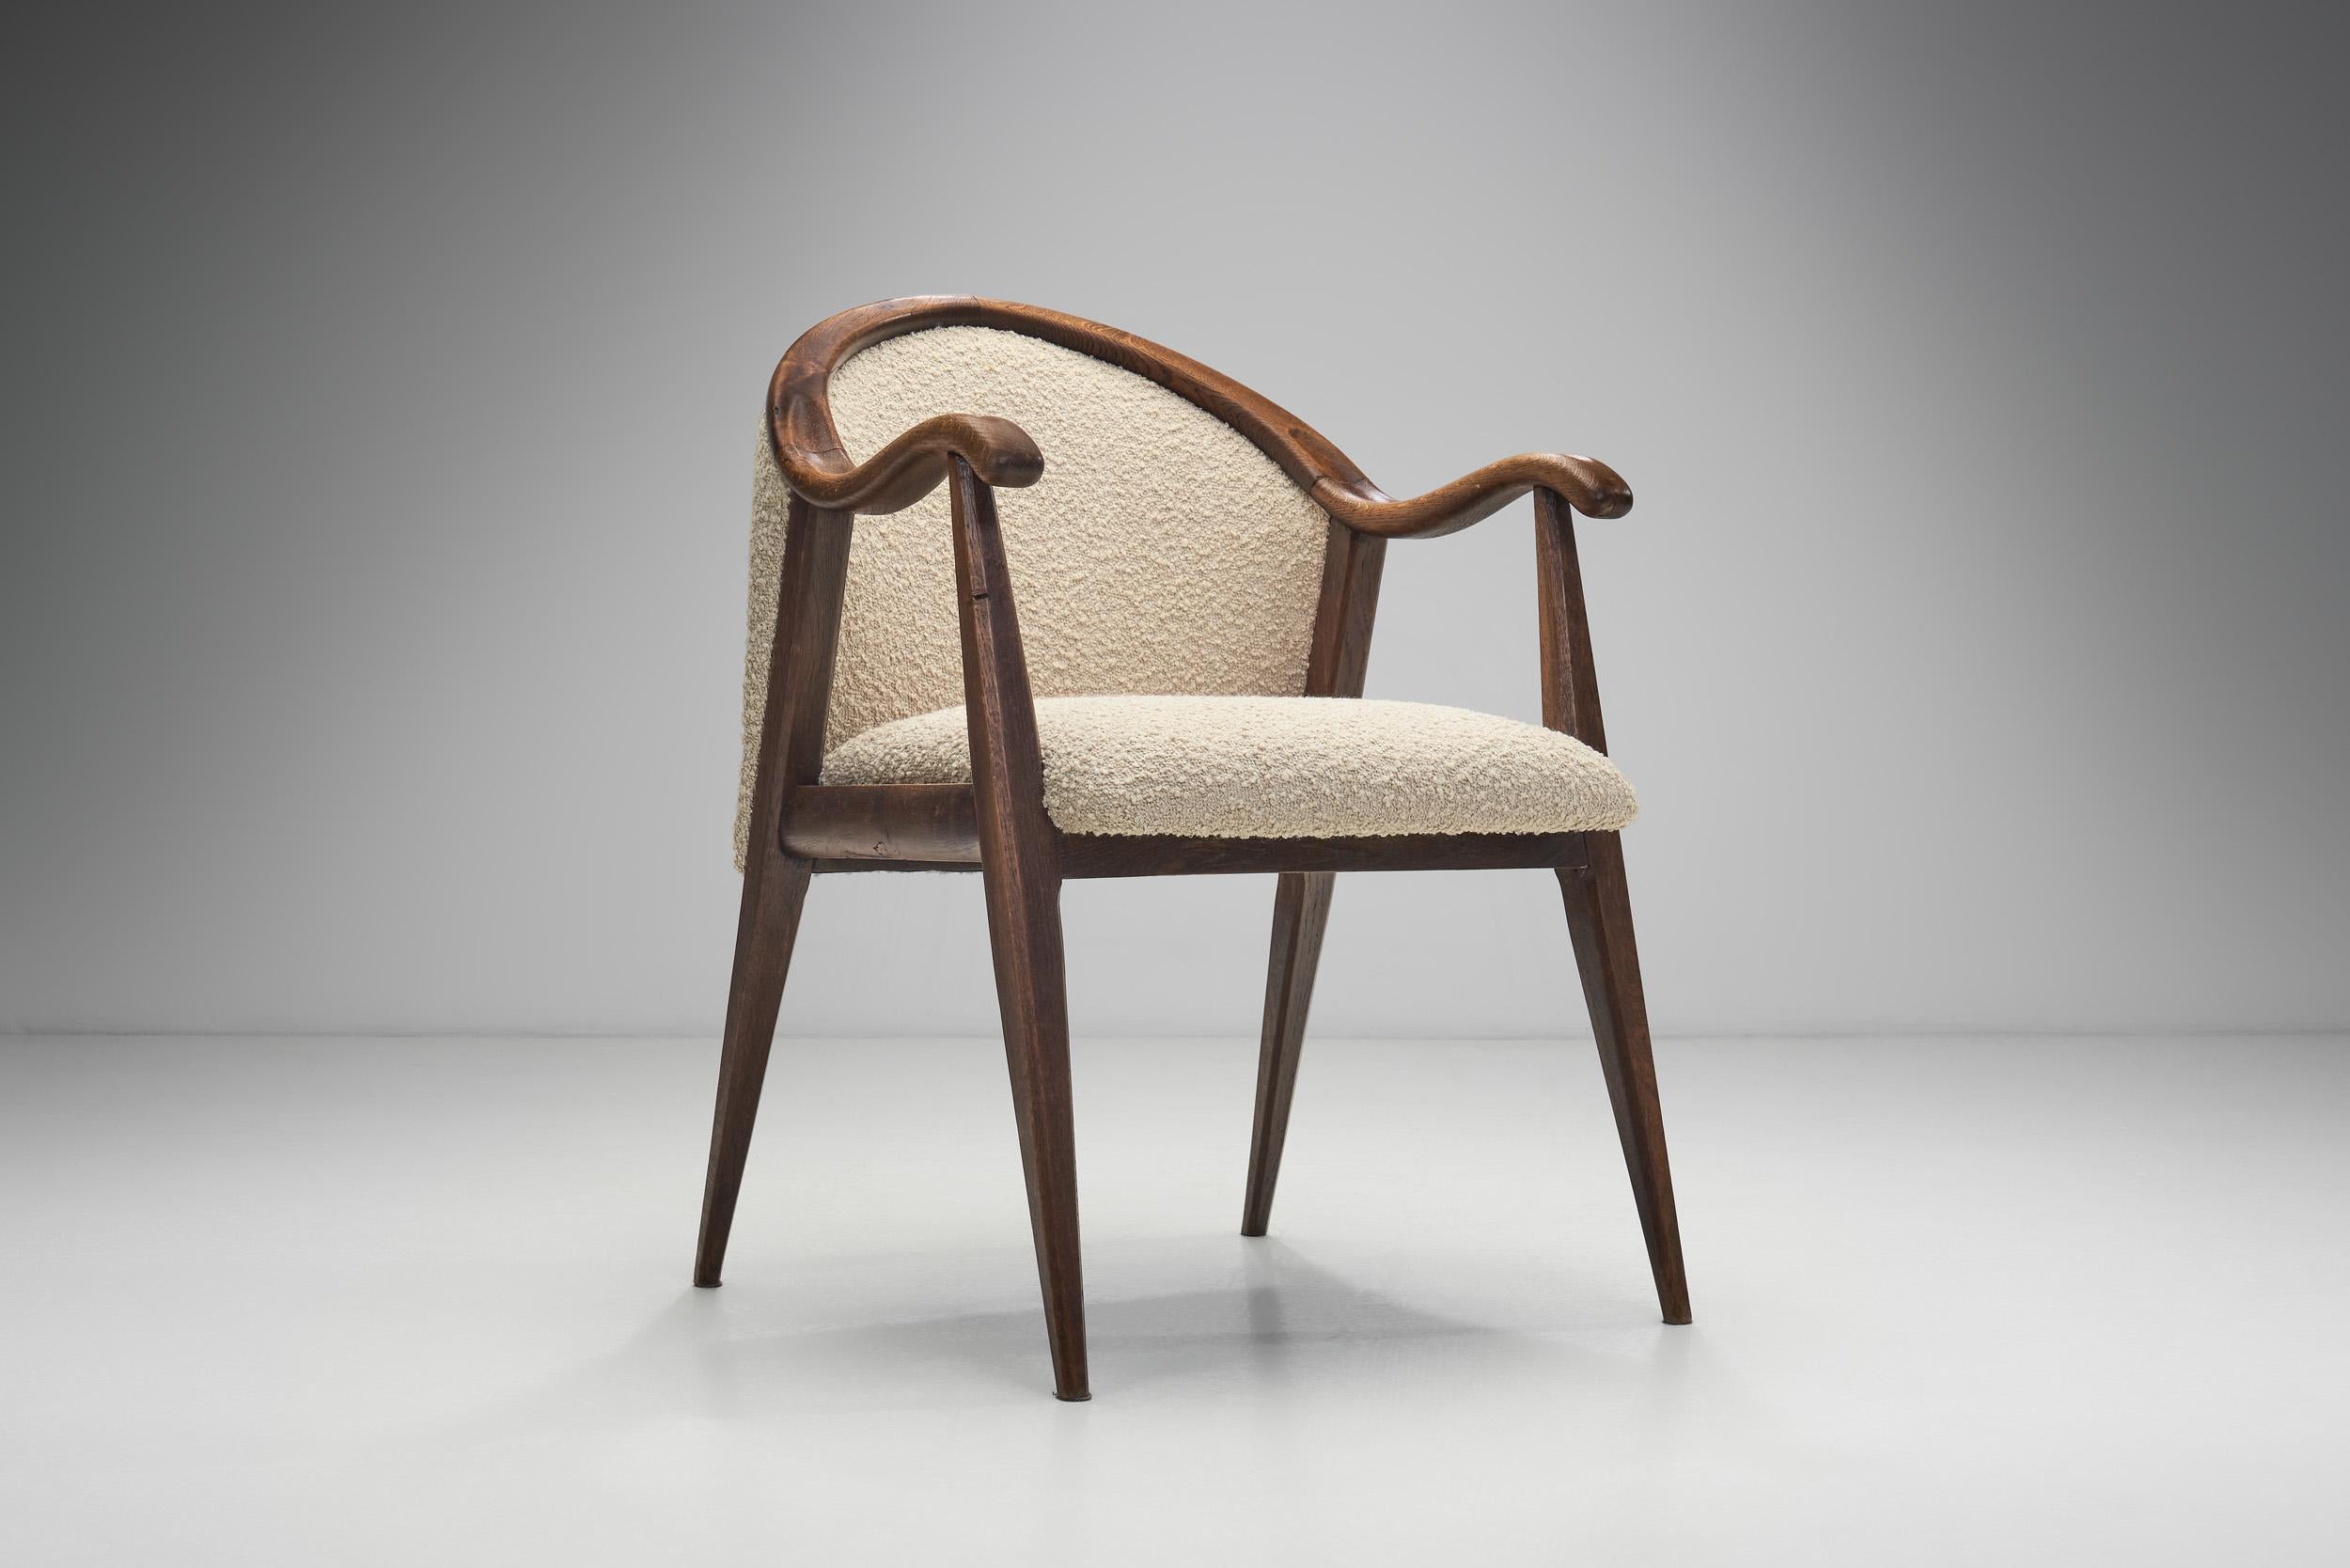 French Oak Art Deco Chairs in Taupe Bouclé, France 1930s For Sale 8